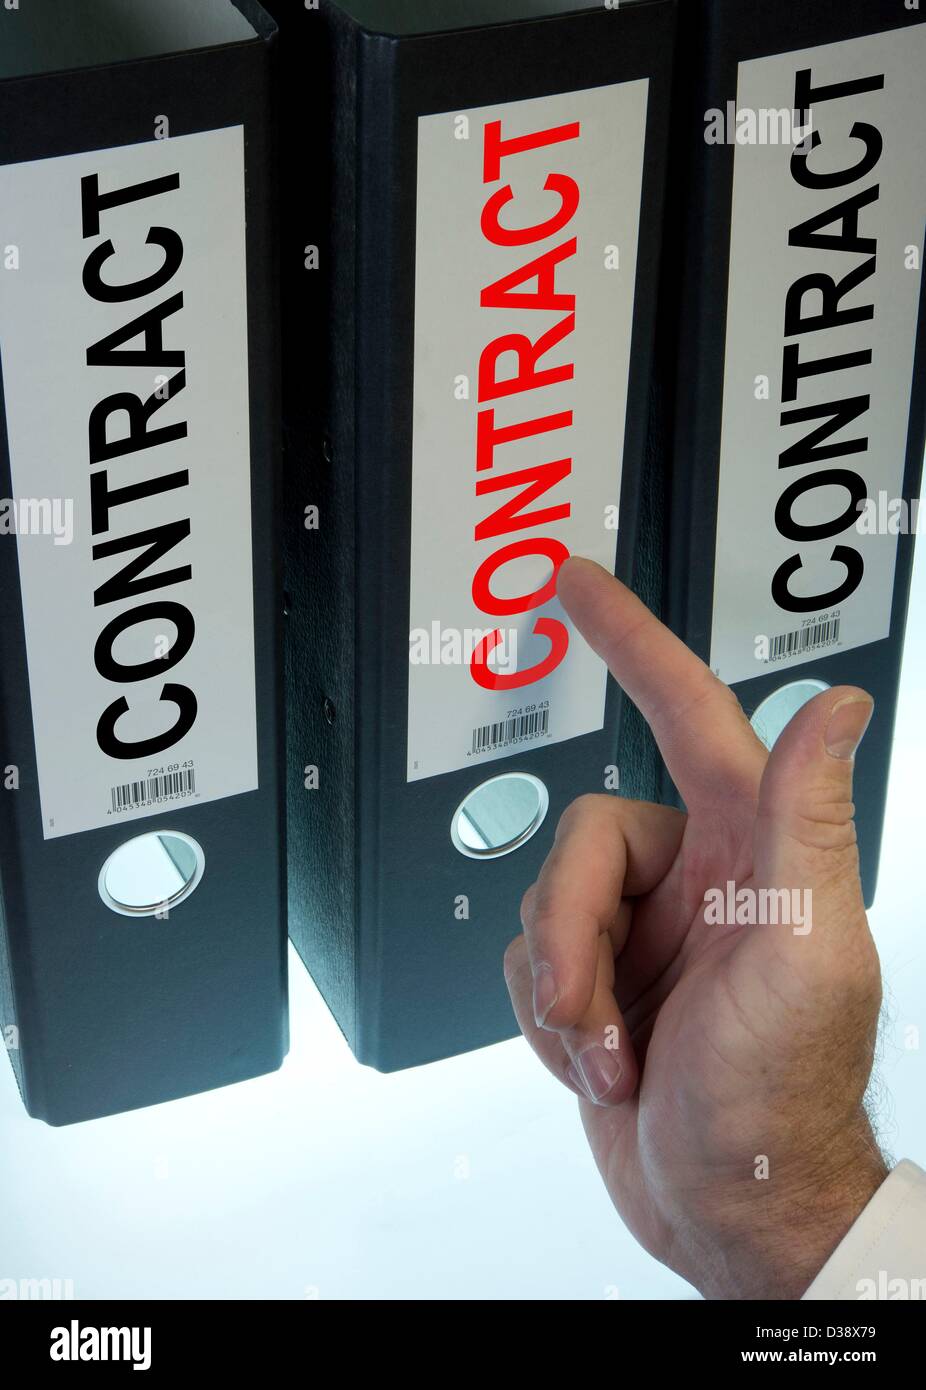 Symbol image,hand pointing to a file folder  labeled Contract Stock Photo